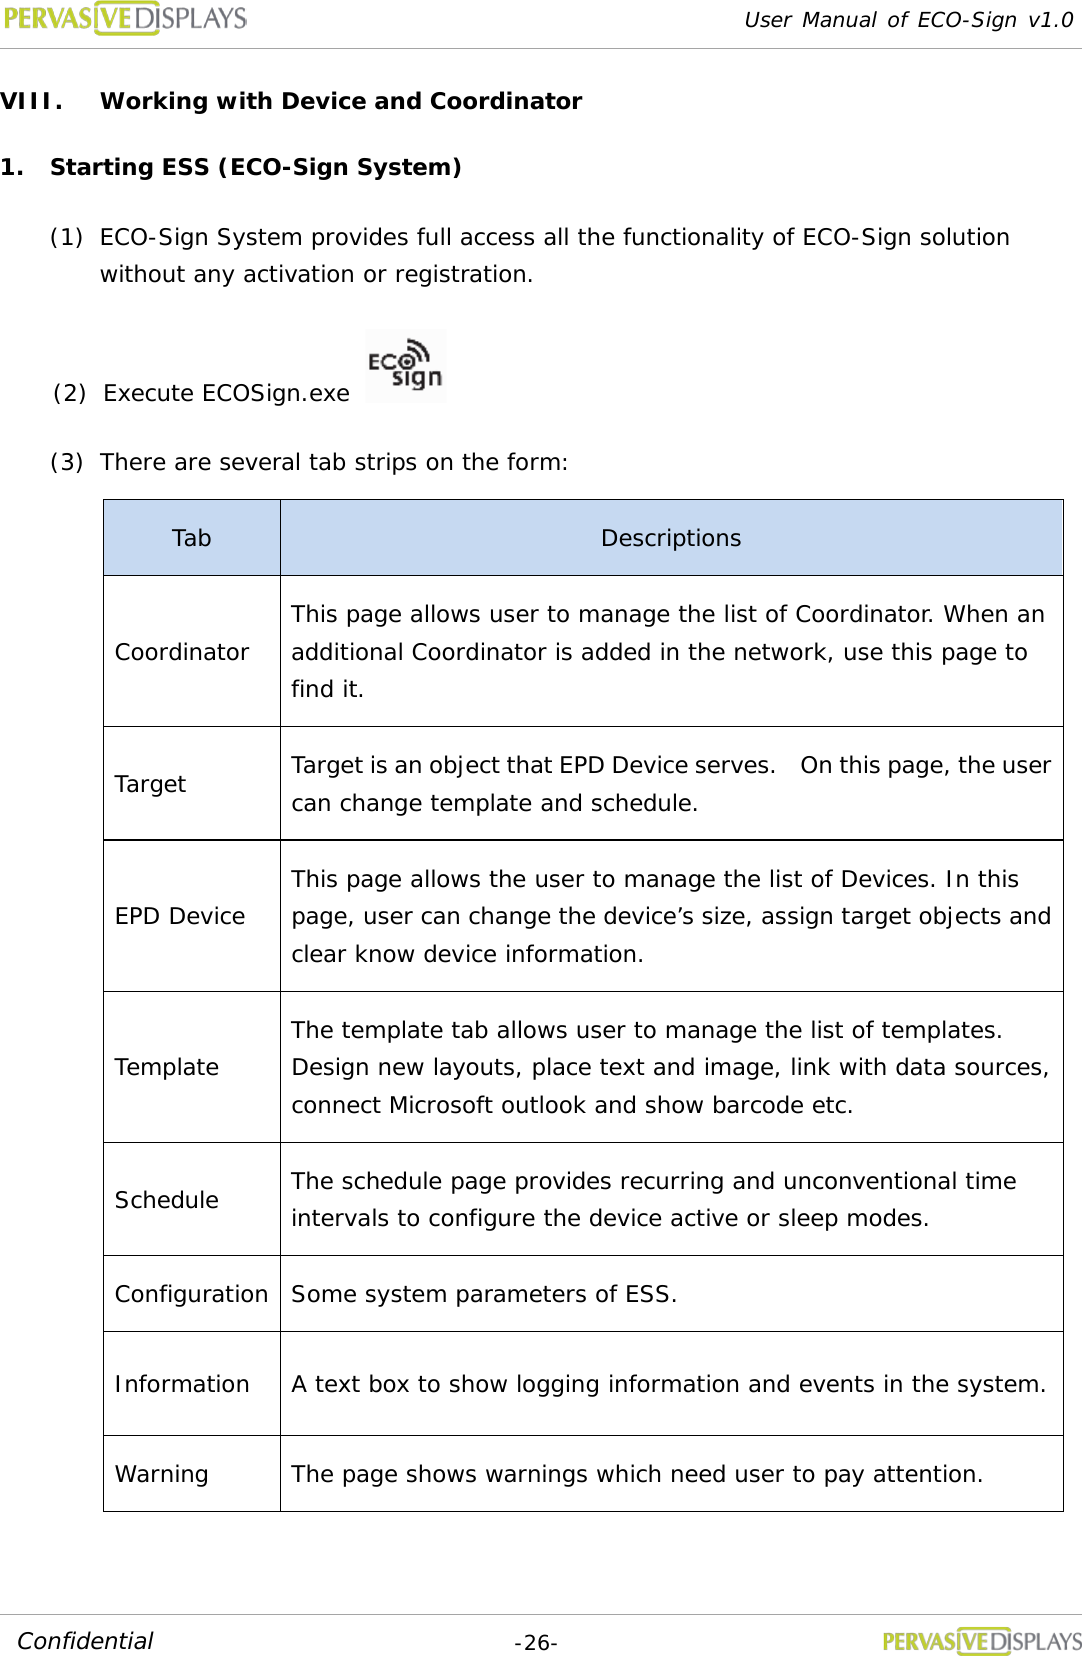 User Manual of ECO-Sign v1.0  -26- Confidential VIII. Working with Device and Coordinator 1. Starting ESS (ECO-Sign System) (1) ECO-Sign System provides full access all the functionality of ECO-Sign solution without any activation or registration. (2) Execute ECOSign.exe    (3) There are several tab strips on the form: Tab Descriptions Coordinator This page allows user to manage the list of Coordinator. When an additional Coordinator is added in the network, use this page to find it. Target Target is an object that EPD Device serves.  On this page, the user can change template and schedule. EPD Device This page allows the user to manage the list of Devices. In this page, user can change the device’s size, assign target objects and clear know device information. Template The template tab allows user to manage the list of templates. Design new layouts, place text and image, link with data sources, connect Microsoft outlook and show barcode etc. Schedule The schedule page provides recurring and unconventional time intervals to configure the device active or sleep modes. Configuration Some system parameters of ESS. Information A text box to show logging information and events in the system. Warning The page shows warnings which need user to pay attention.  